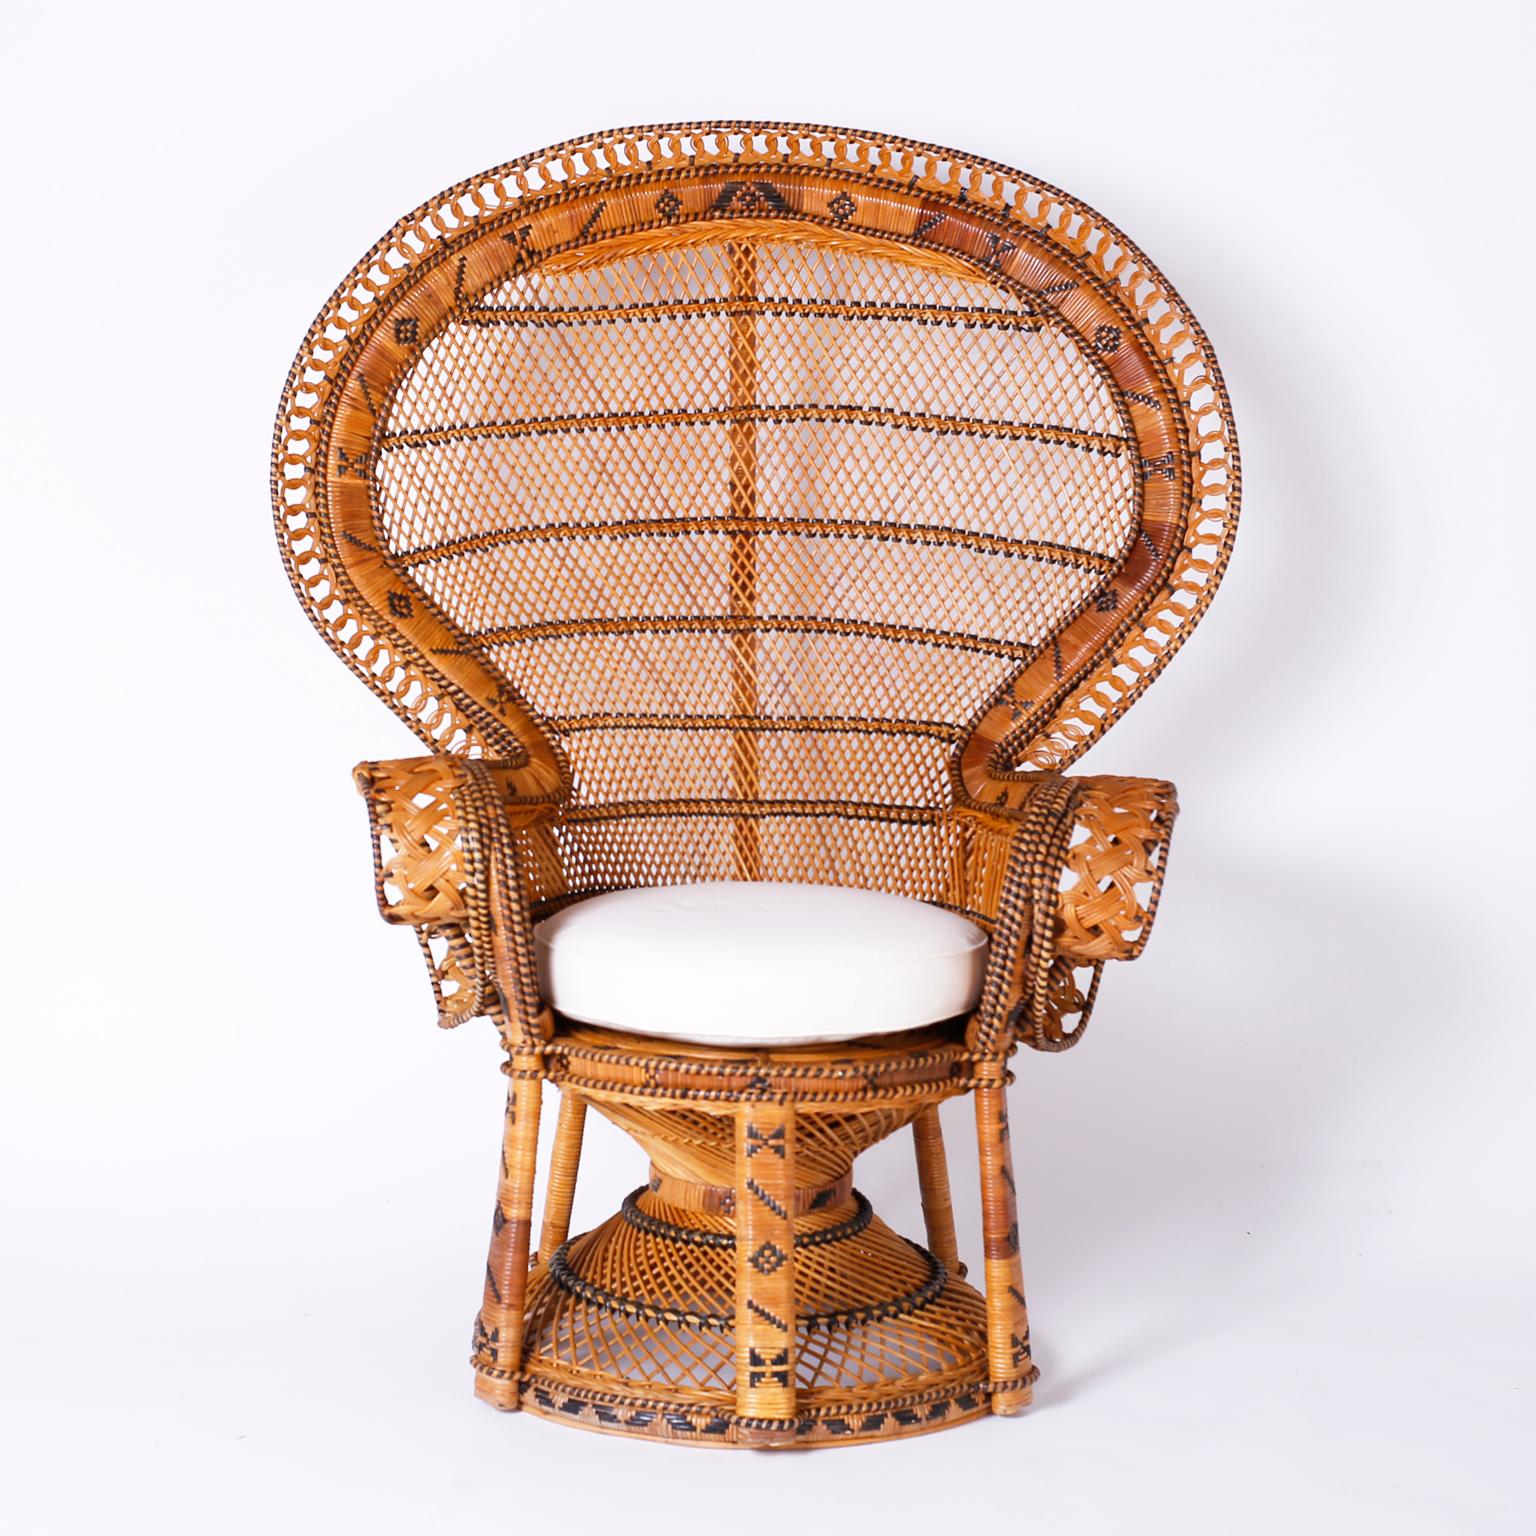 Near pair of peacock chairs with their iconic form crafted in wicker and reed with woven geometric designs and a matching round table. Best of the genre. 

Table measures- H: 21 DM: 26.5